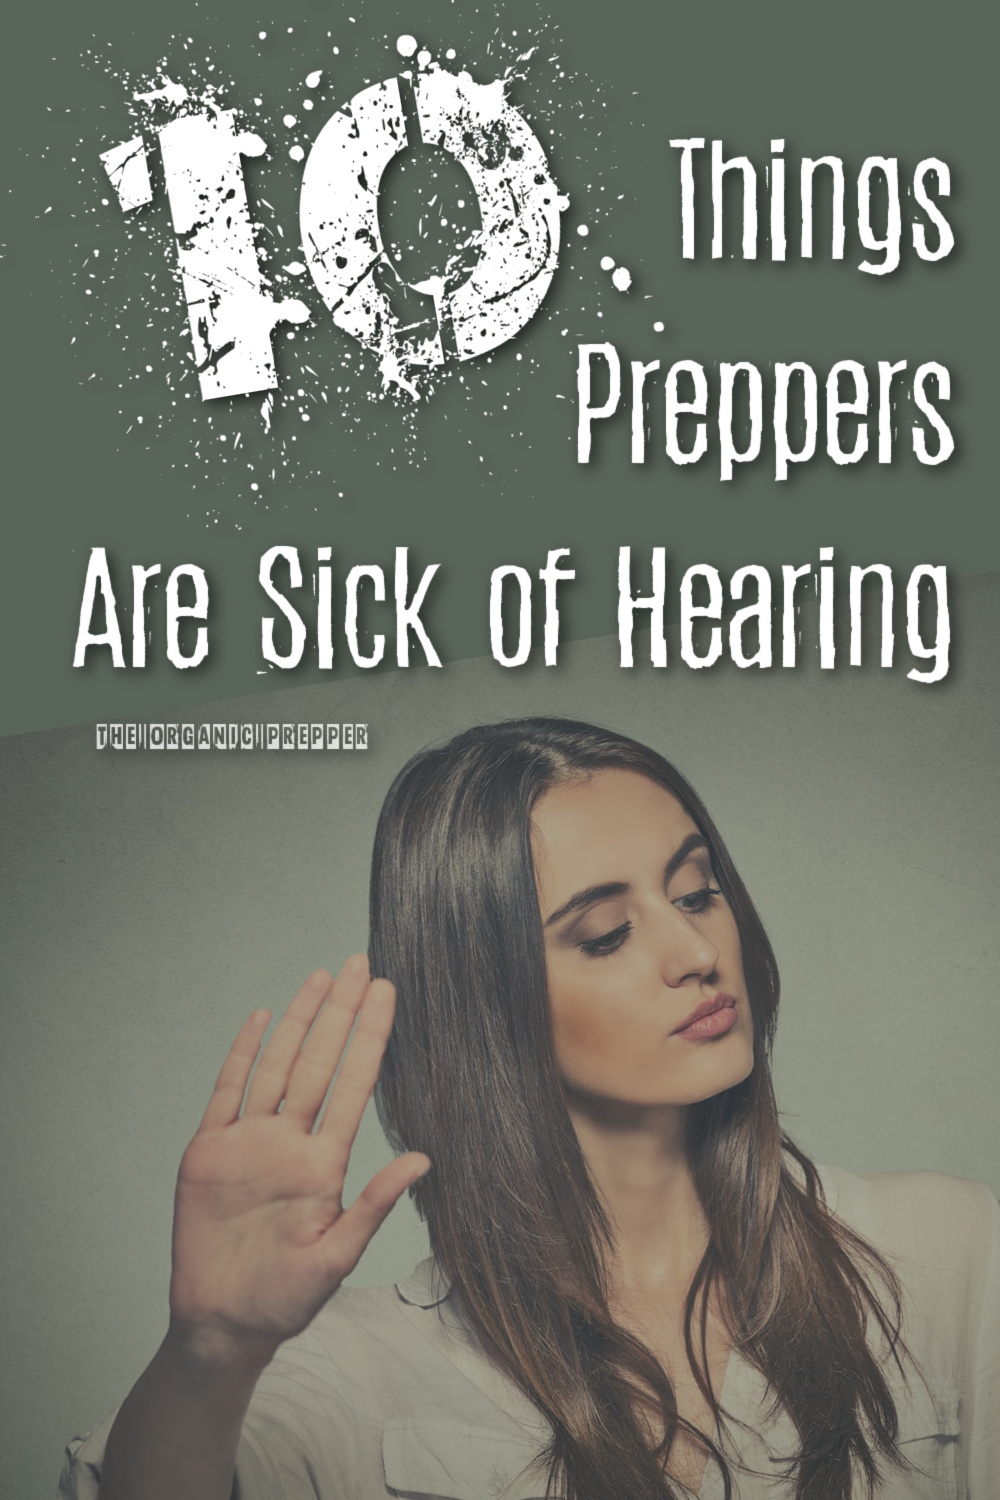 10 Things Preppers Are Sick of Hearing